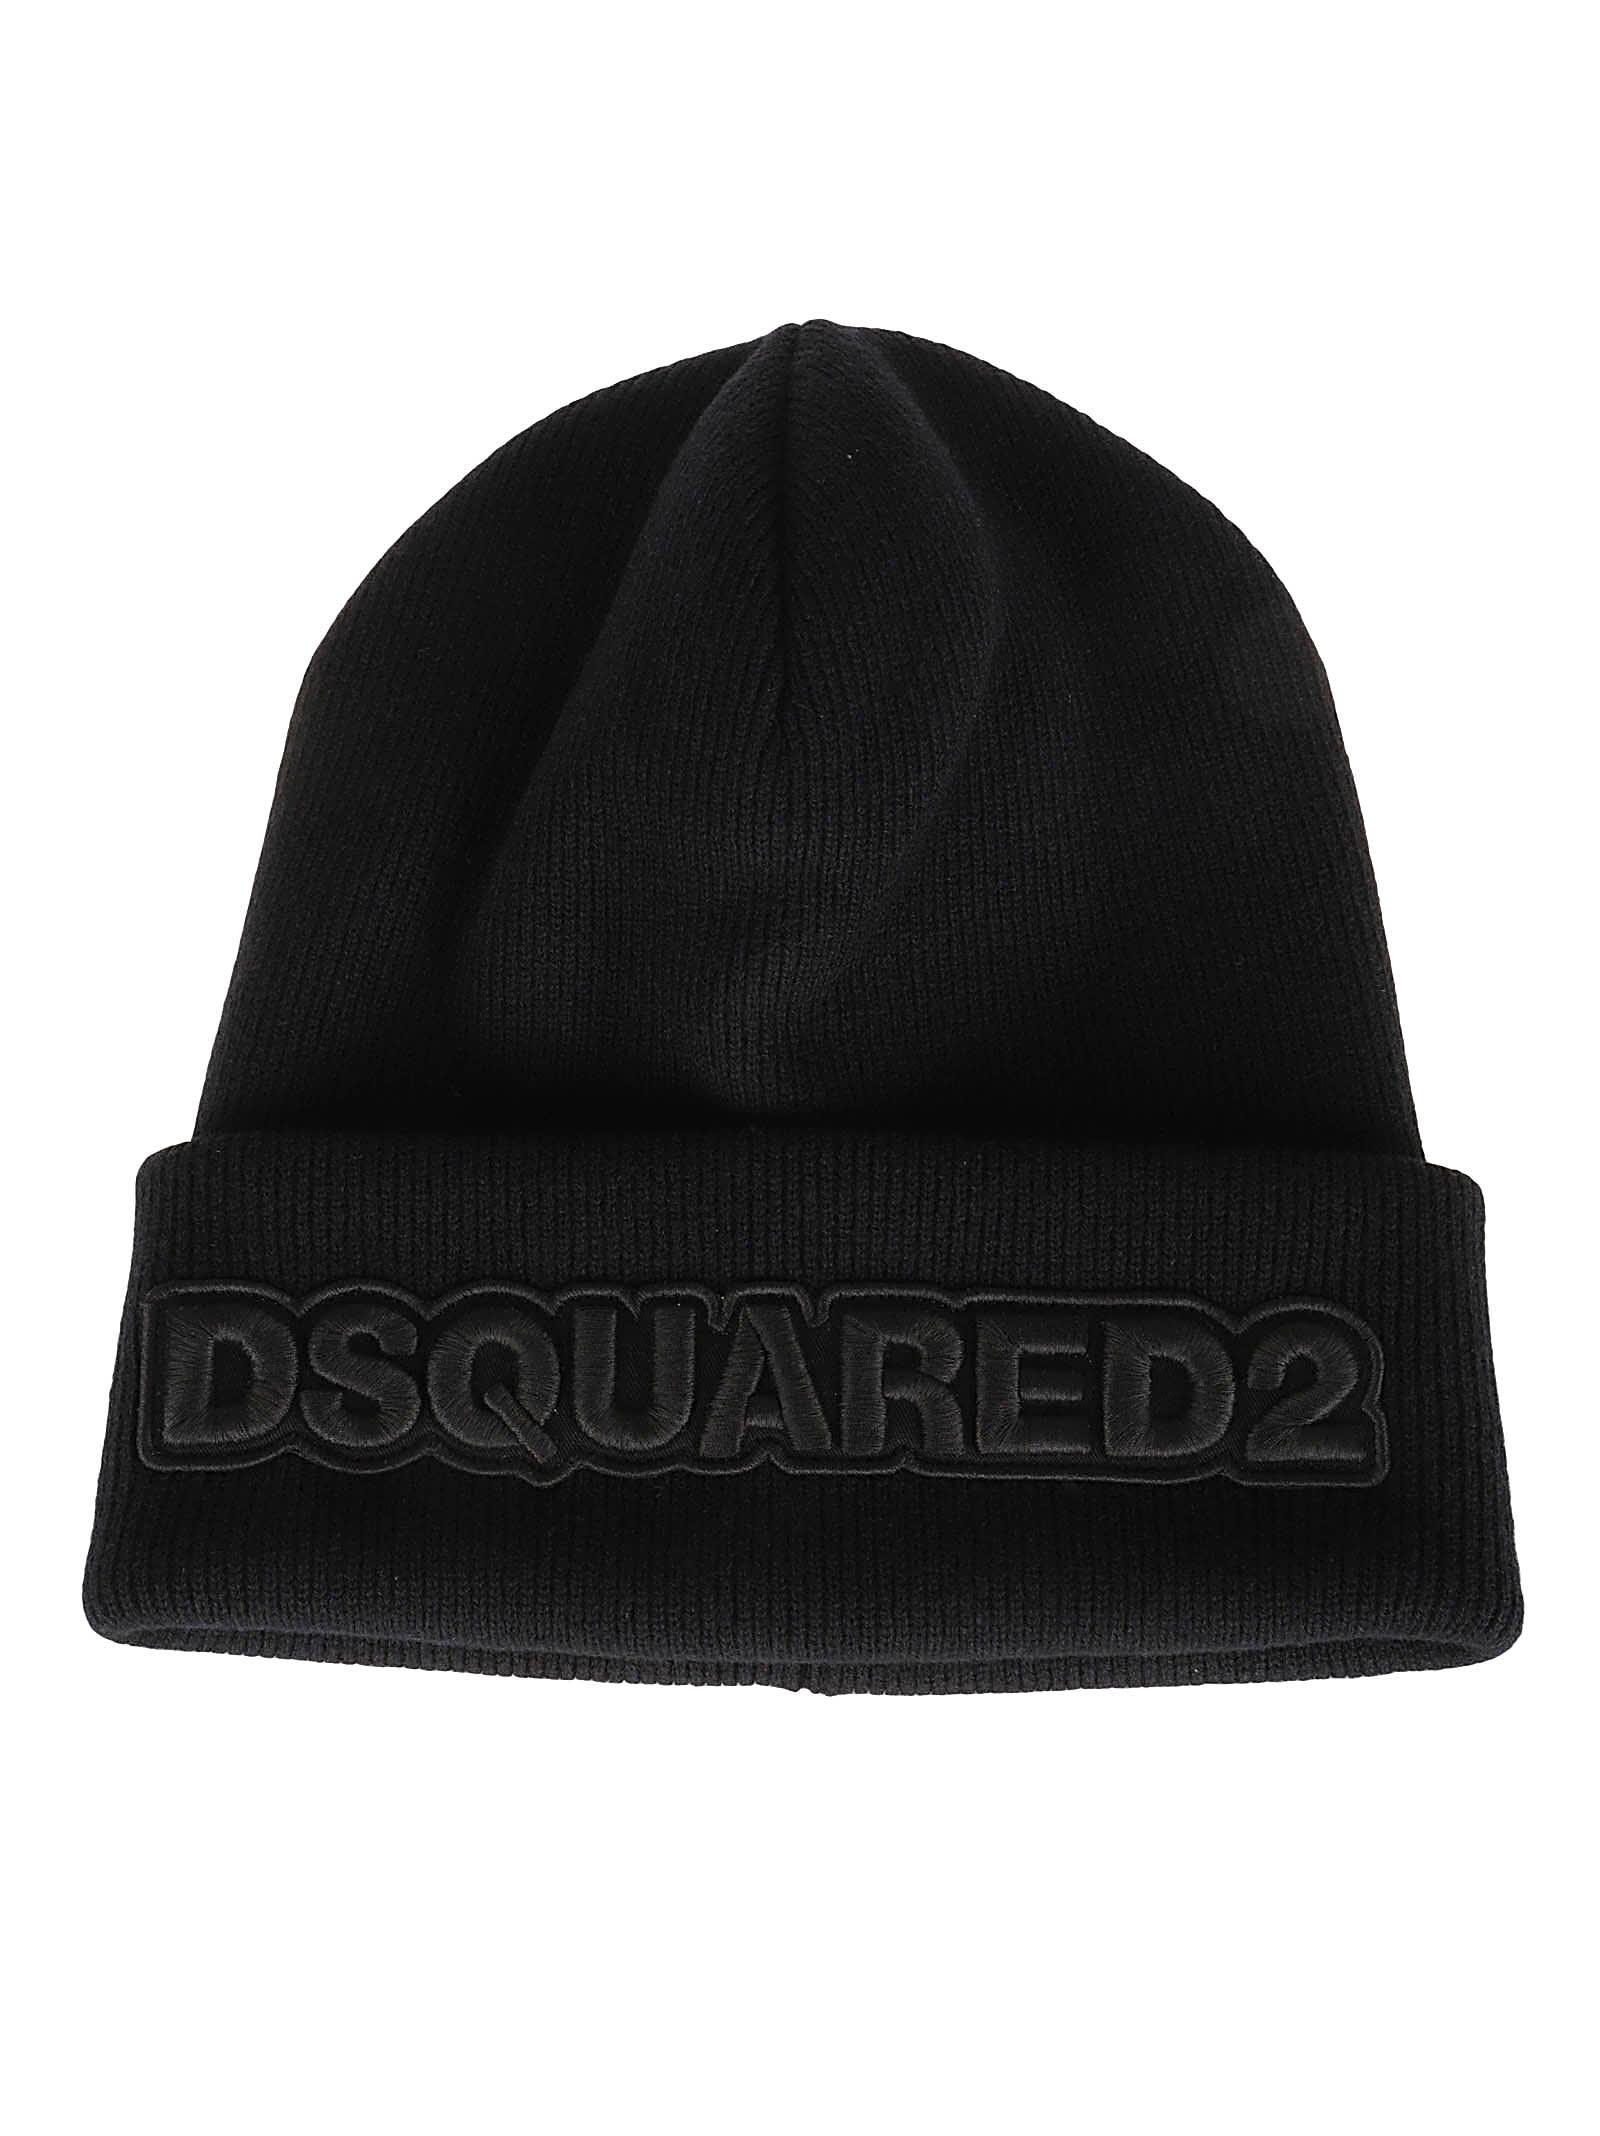 DSquared² Logo Embroidered Knit Beanie in Black for Men | Lyst